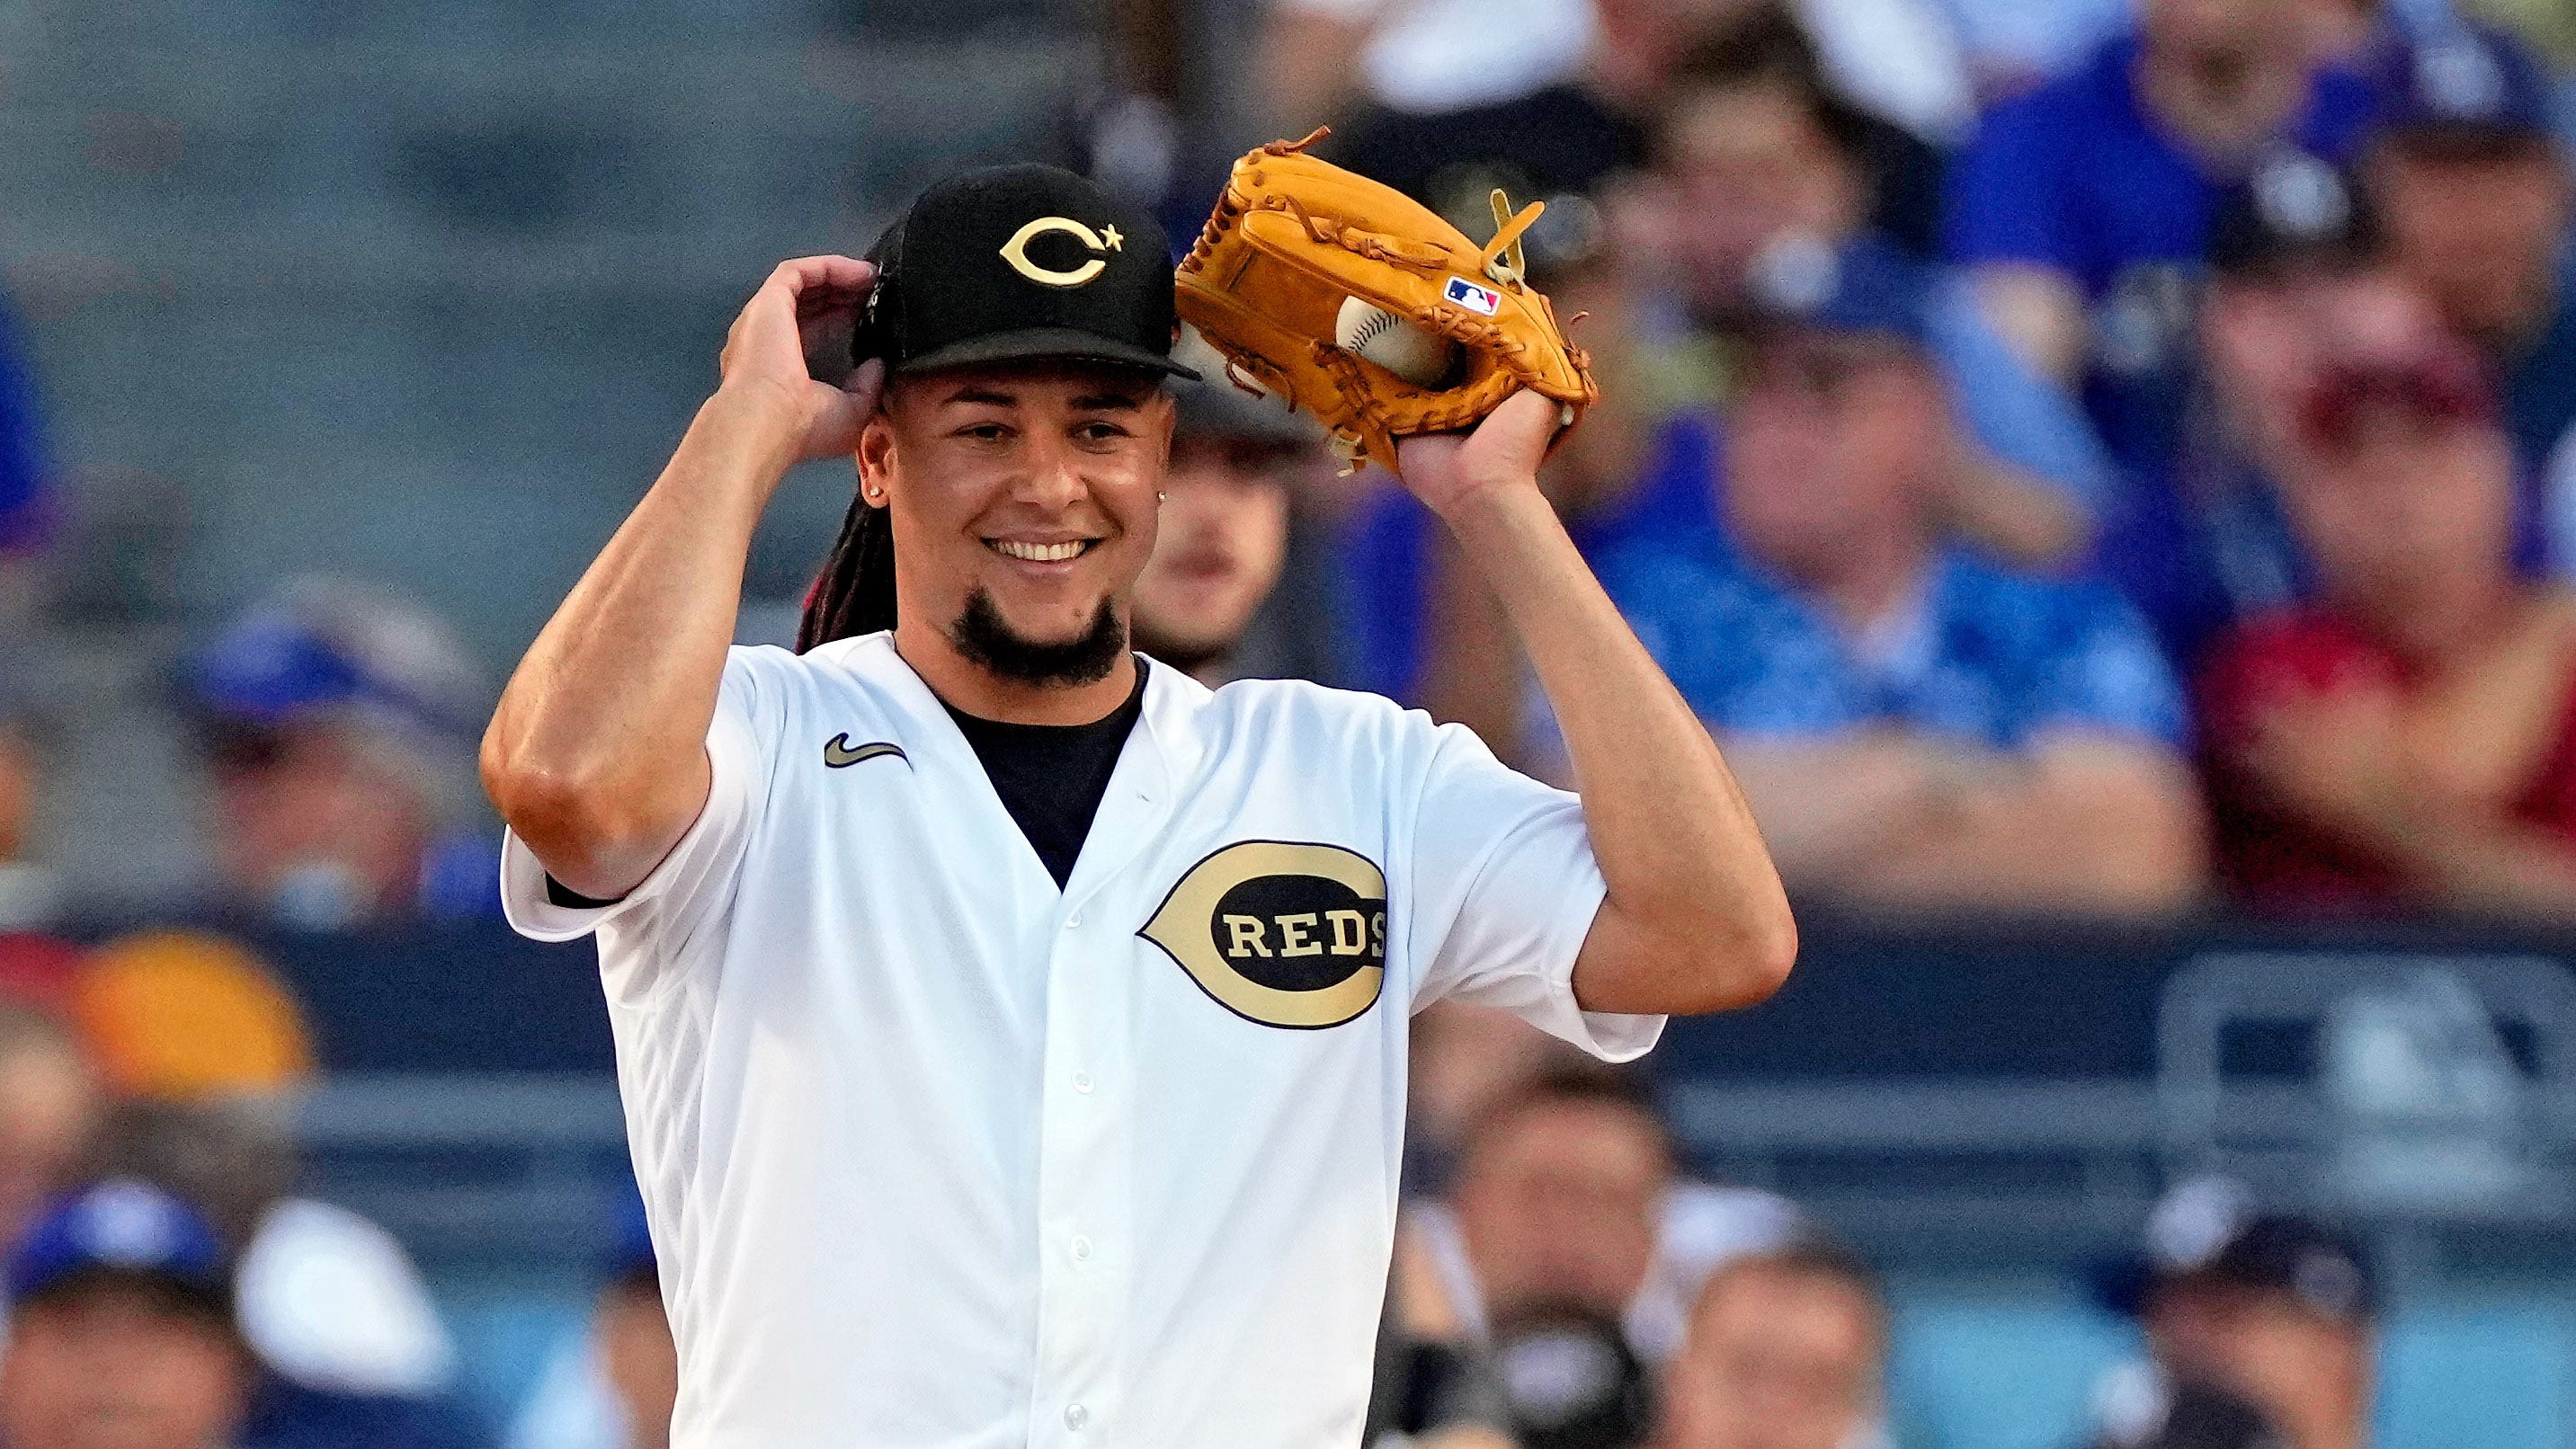 Luis Castillo strikes out two batters in 2022 MLB AllStar Game